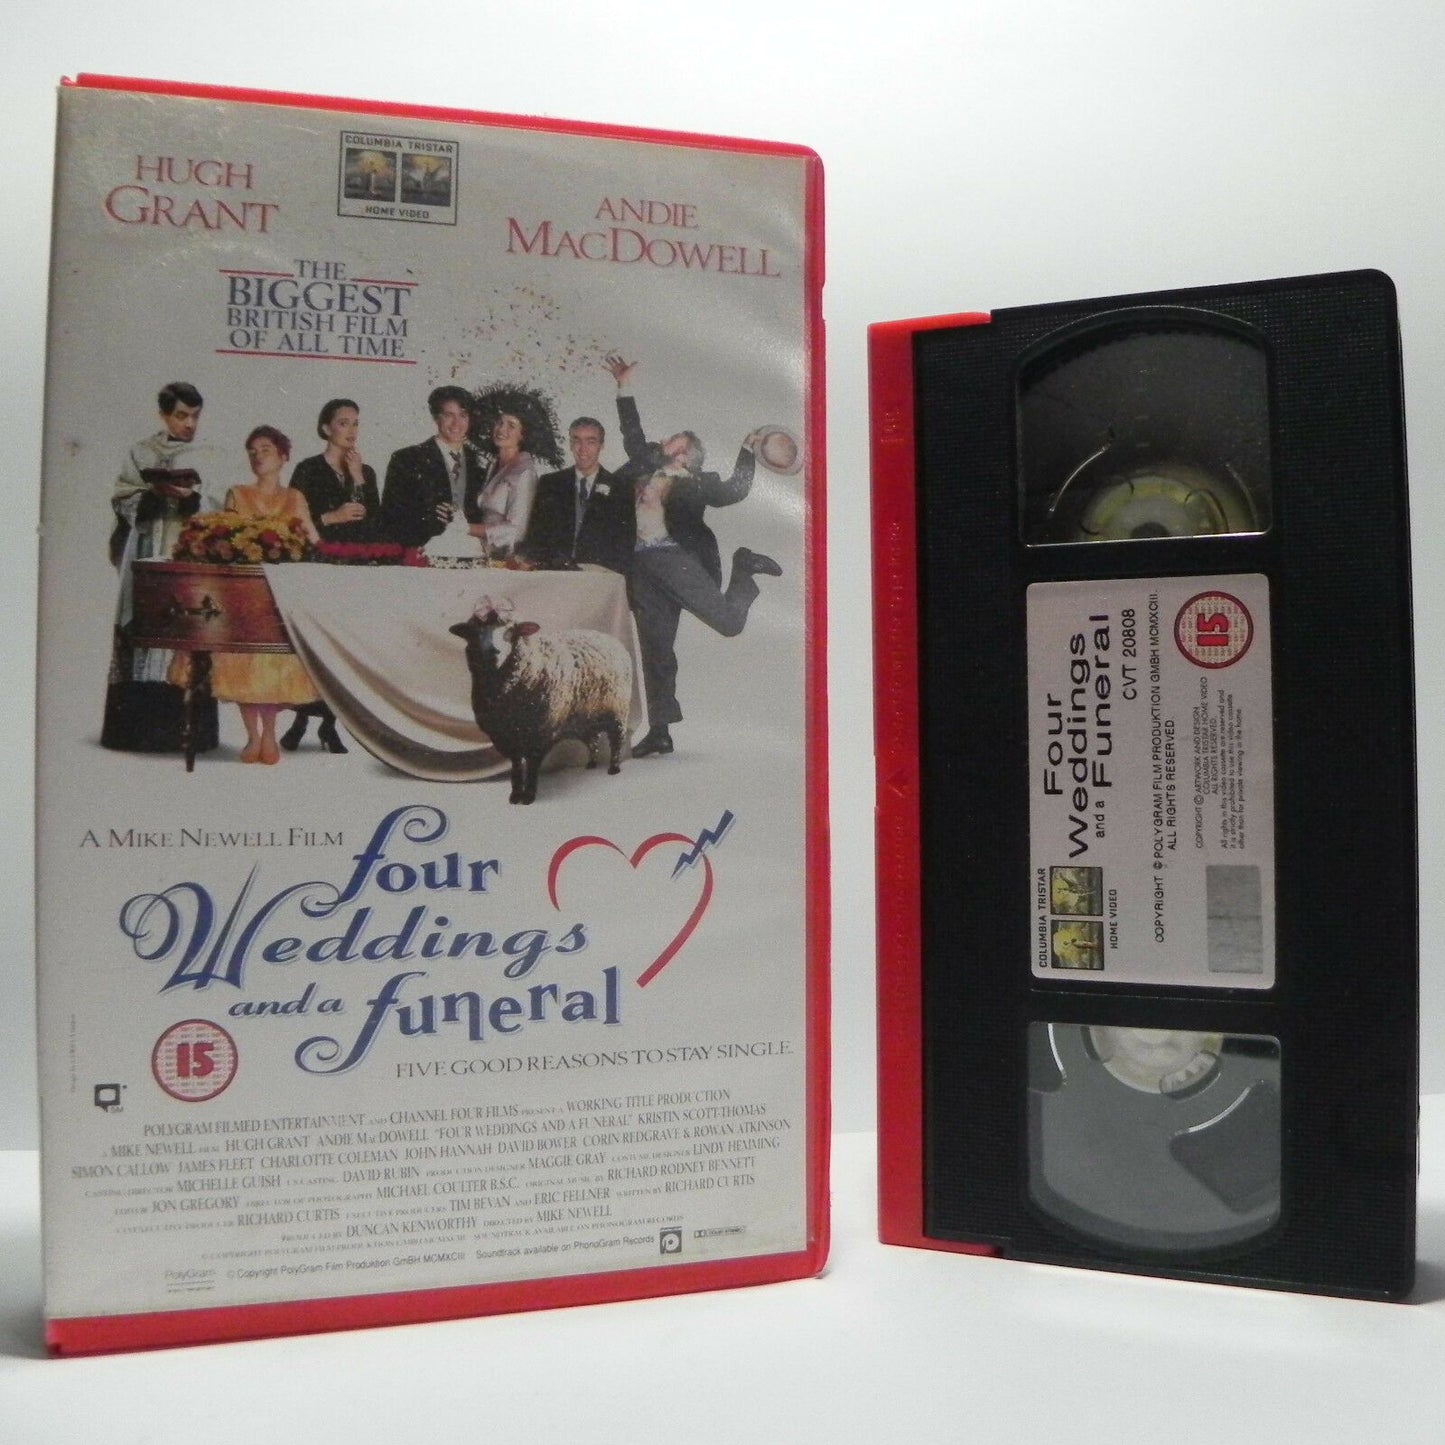 Four Weddings And The Funeral: (1994) Comedy/Drama - Large Box - H.Grant - VHS-